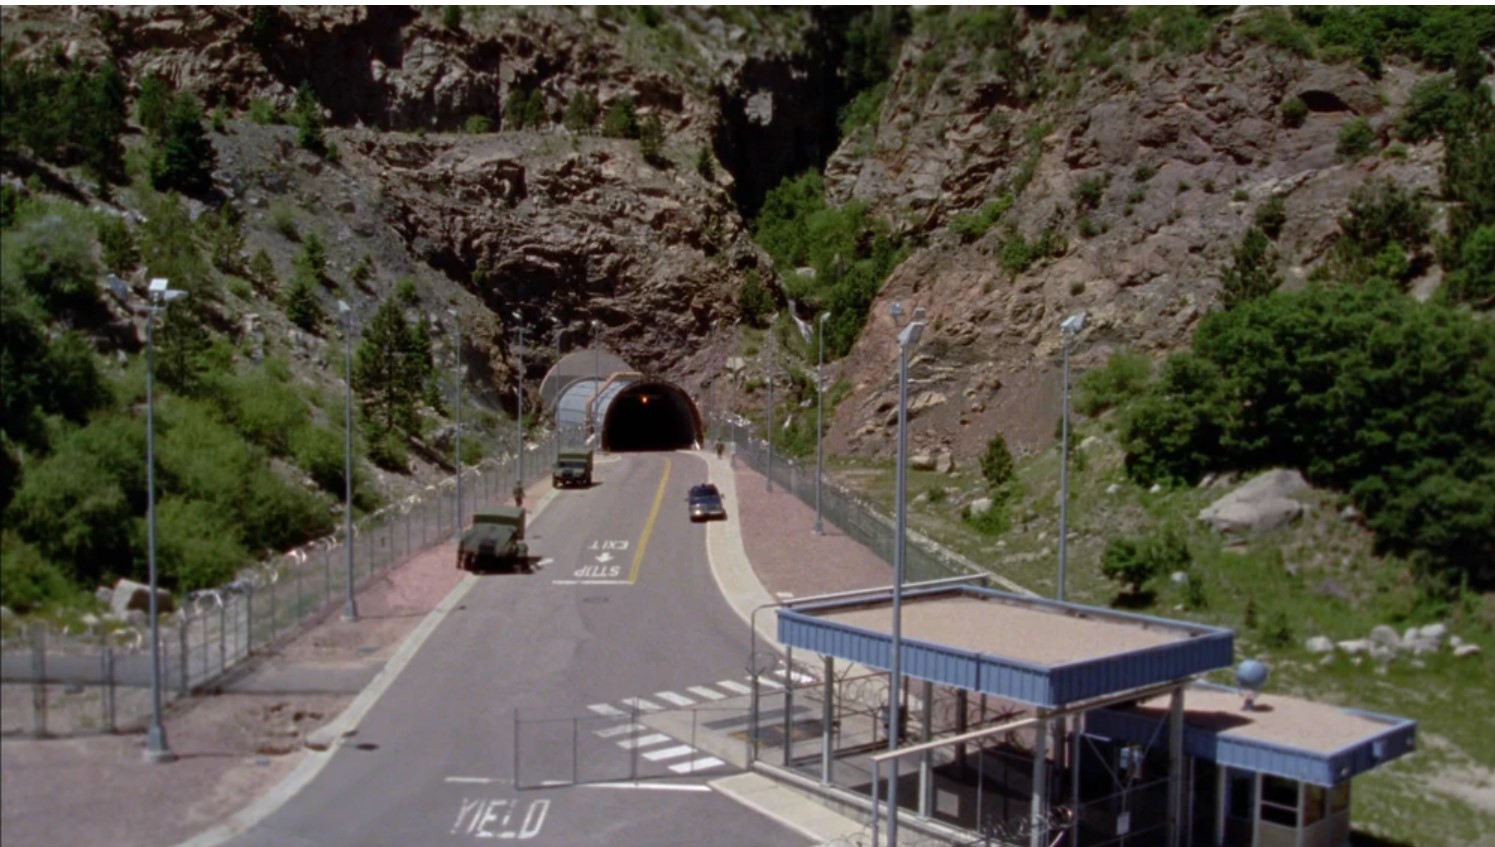 the entrance to NORAD headquarters at Cheyenne Mountain, Colorado, which was used as an establishing shot for all of SG-1